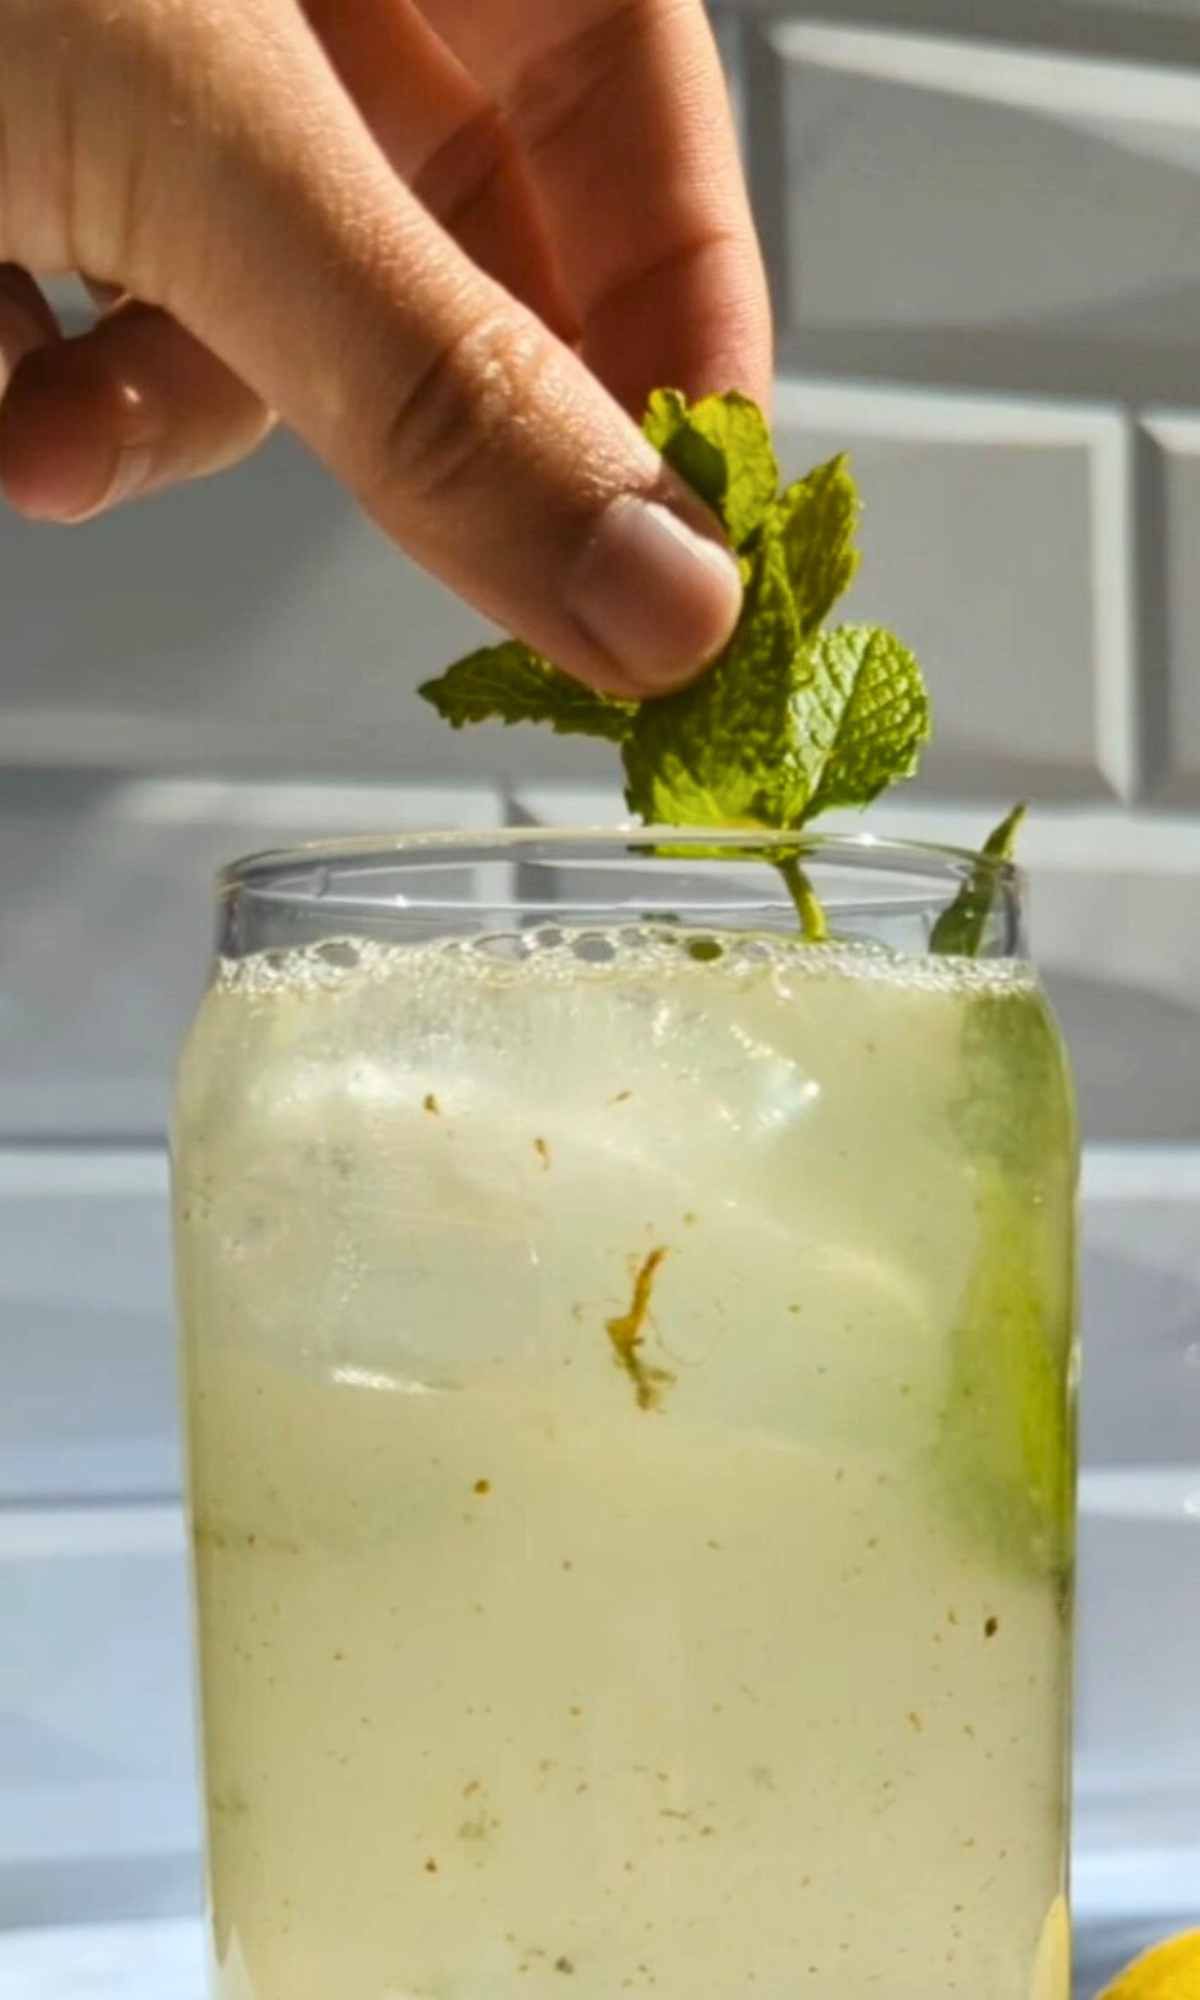 a hand garnishing homemade lemonade with mint leaves from the garden.